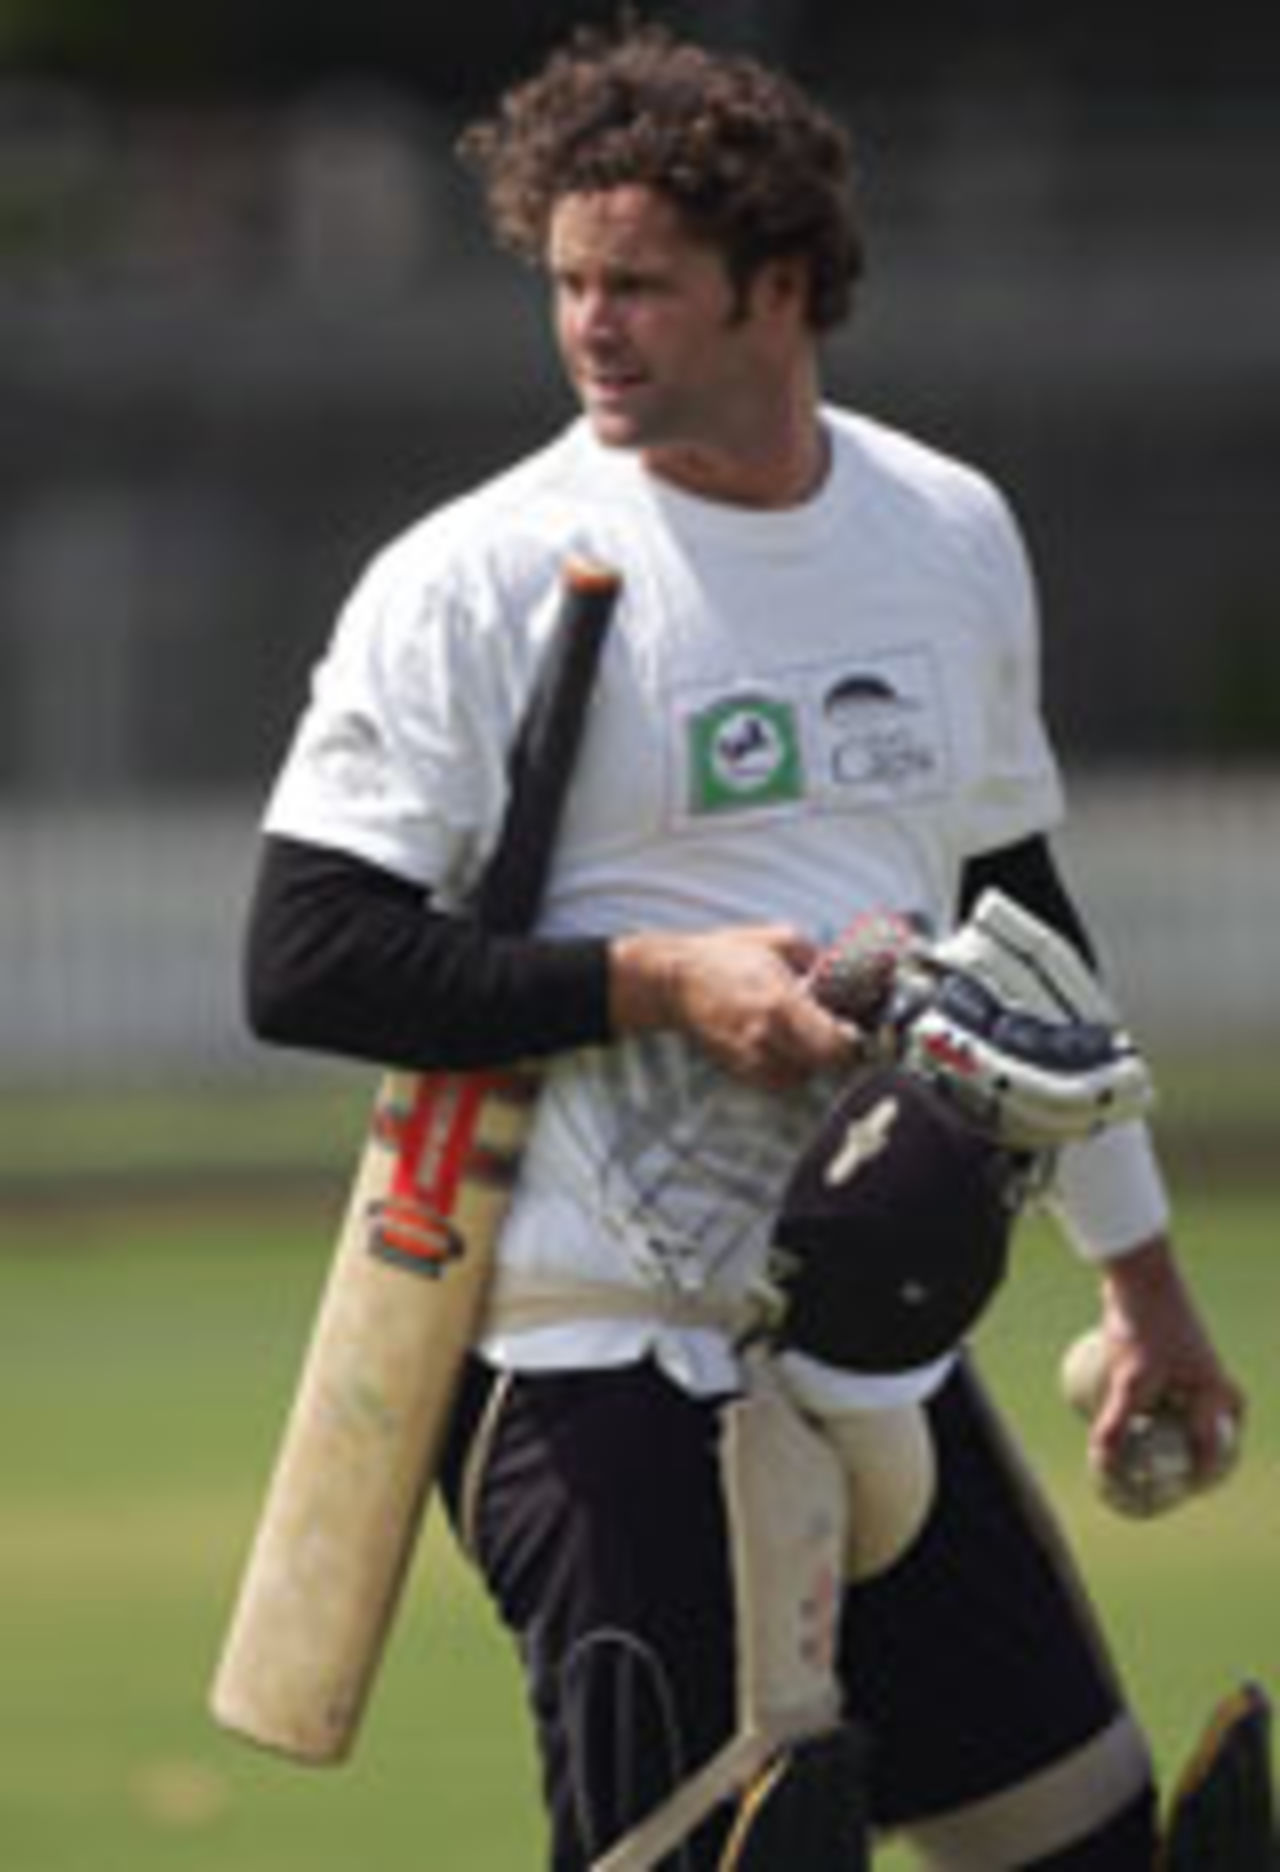 Chris Cairns at nets, Lord's, July 9, 2004